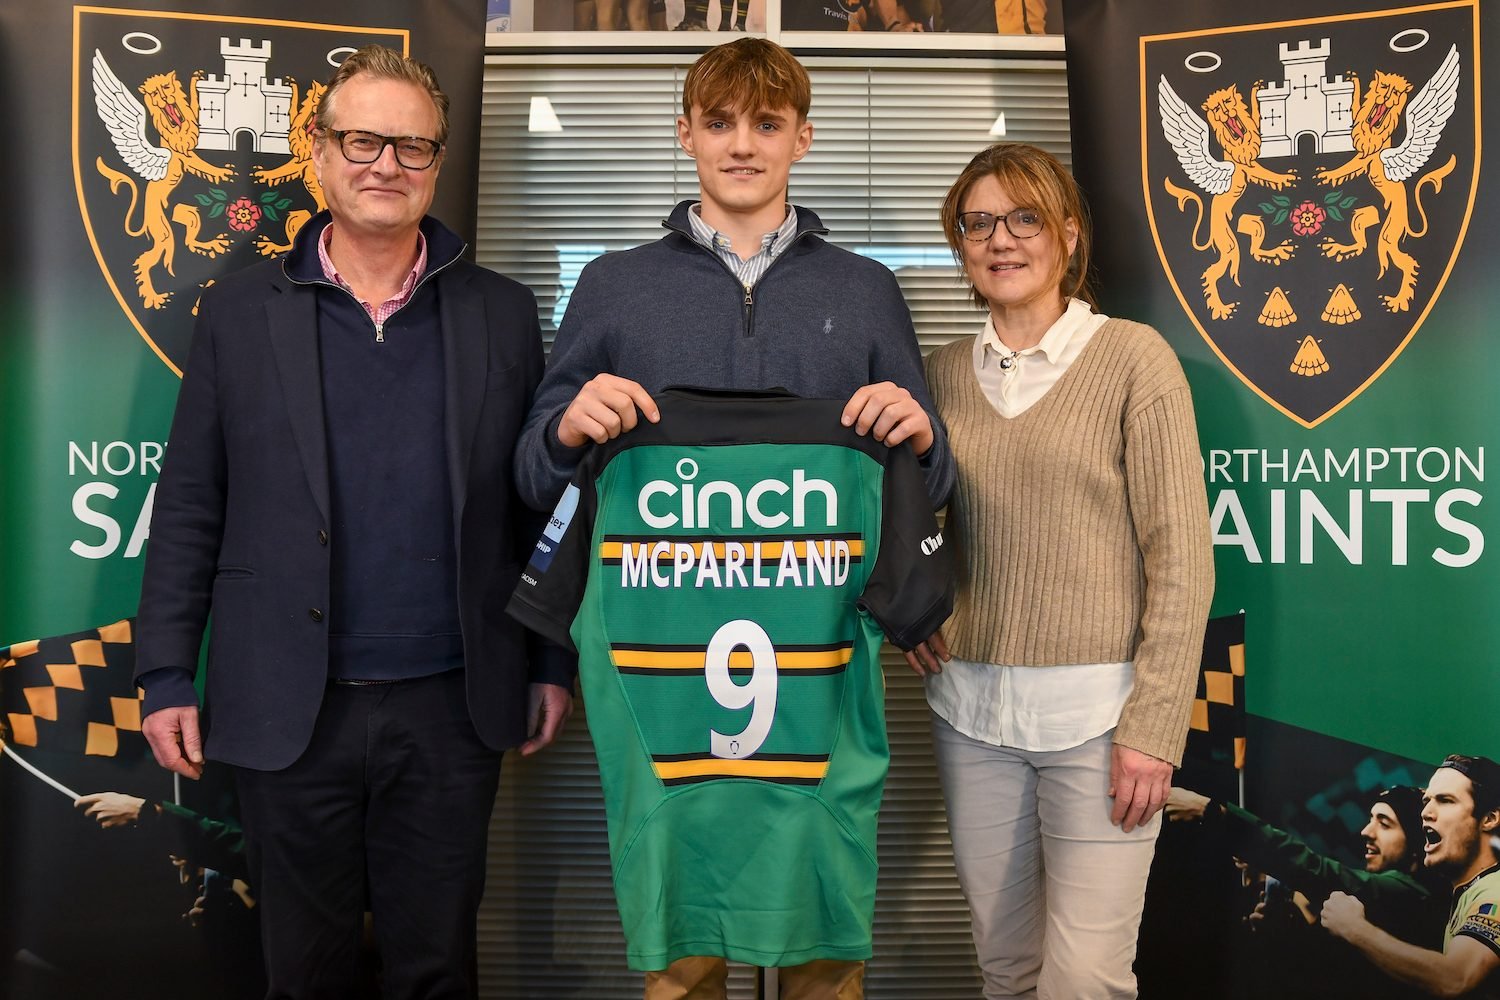 Archie McParland signs for Saints